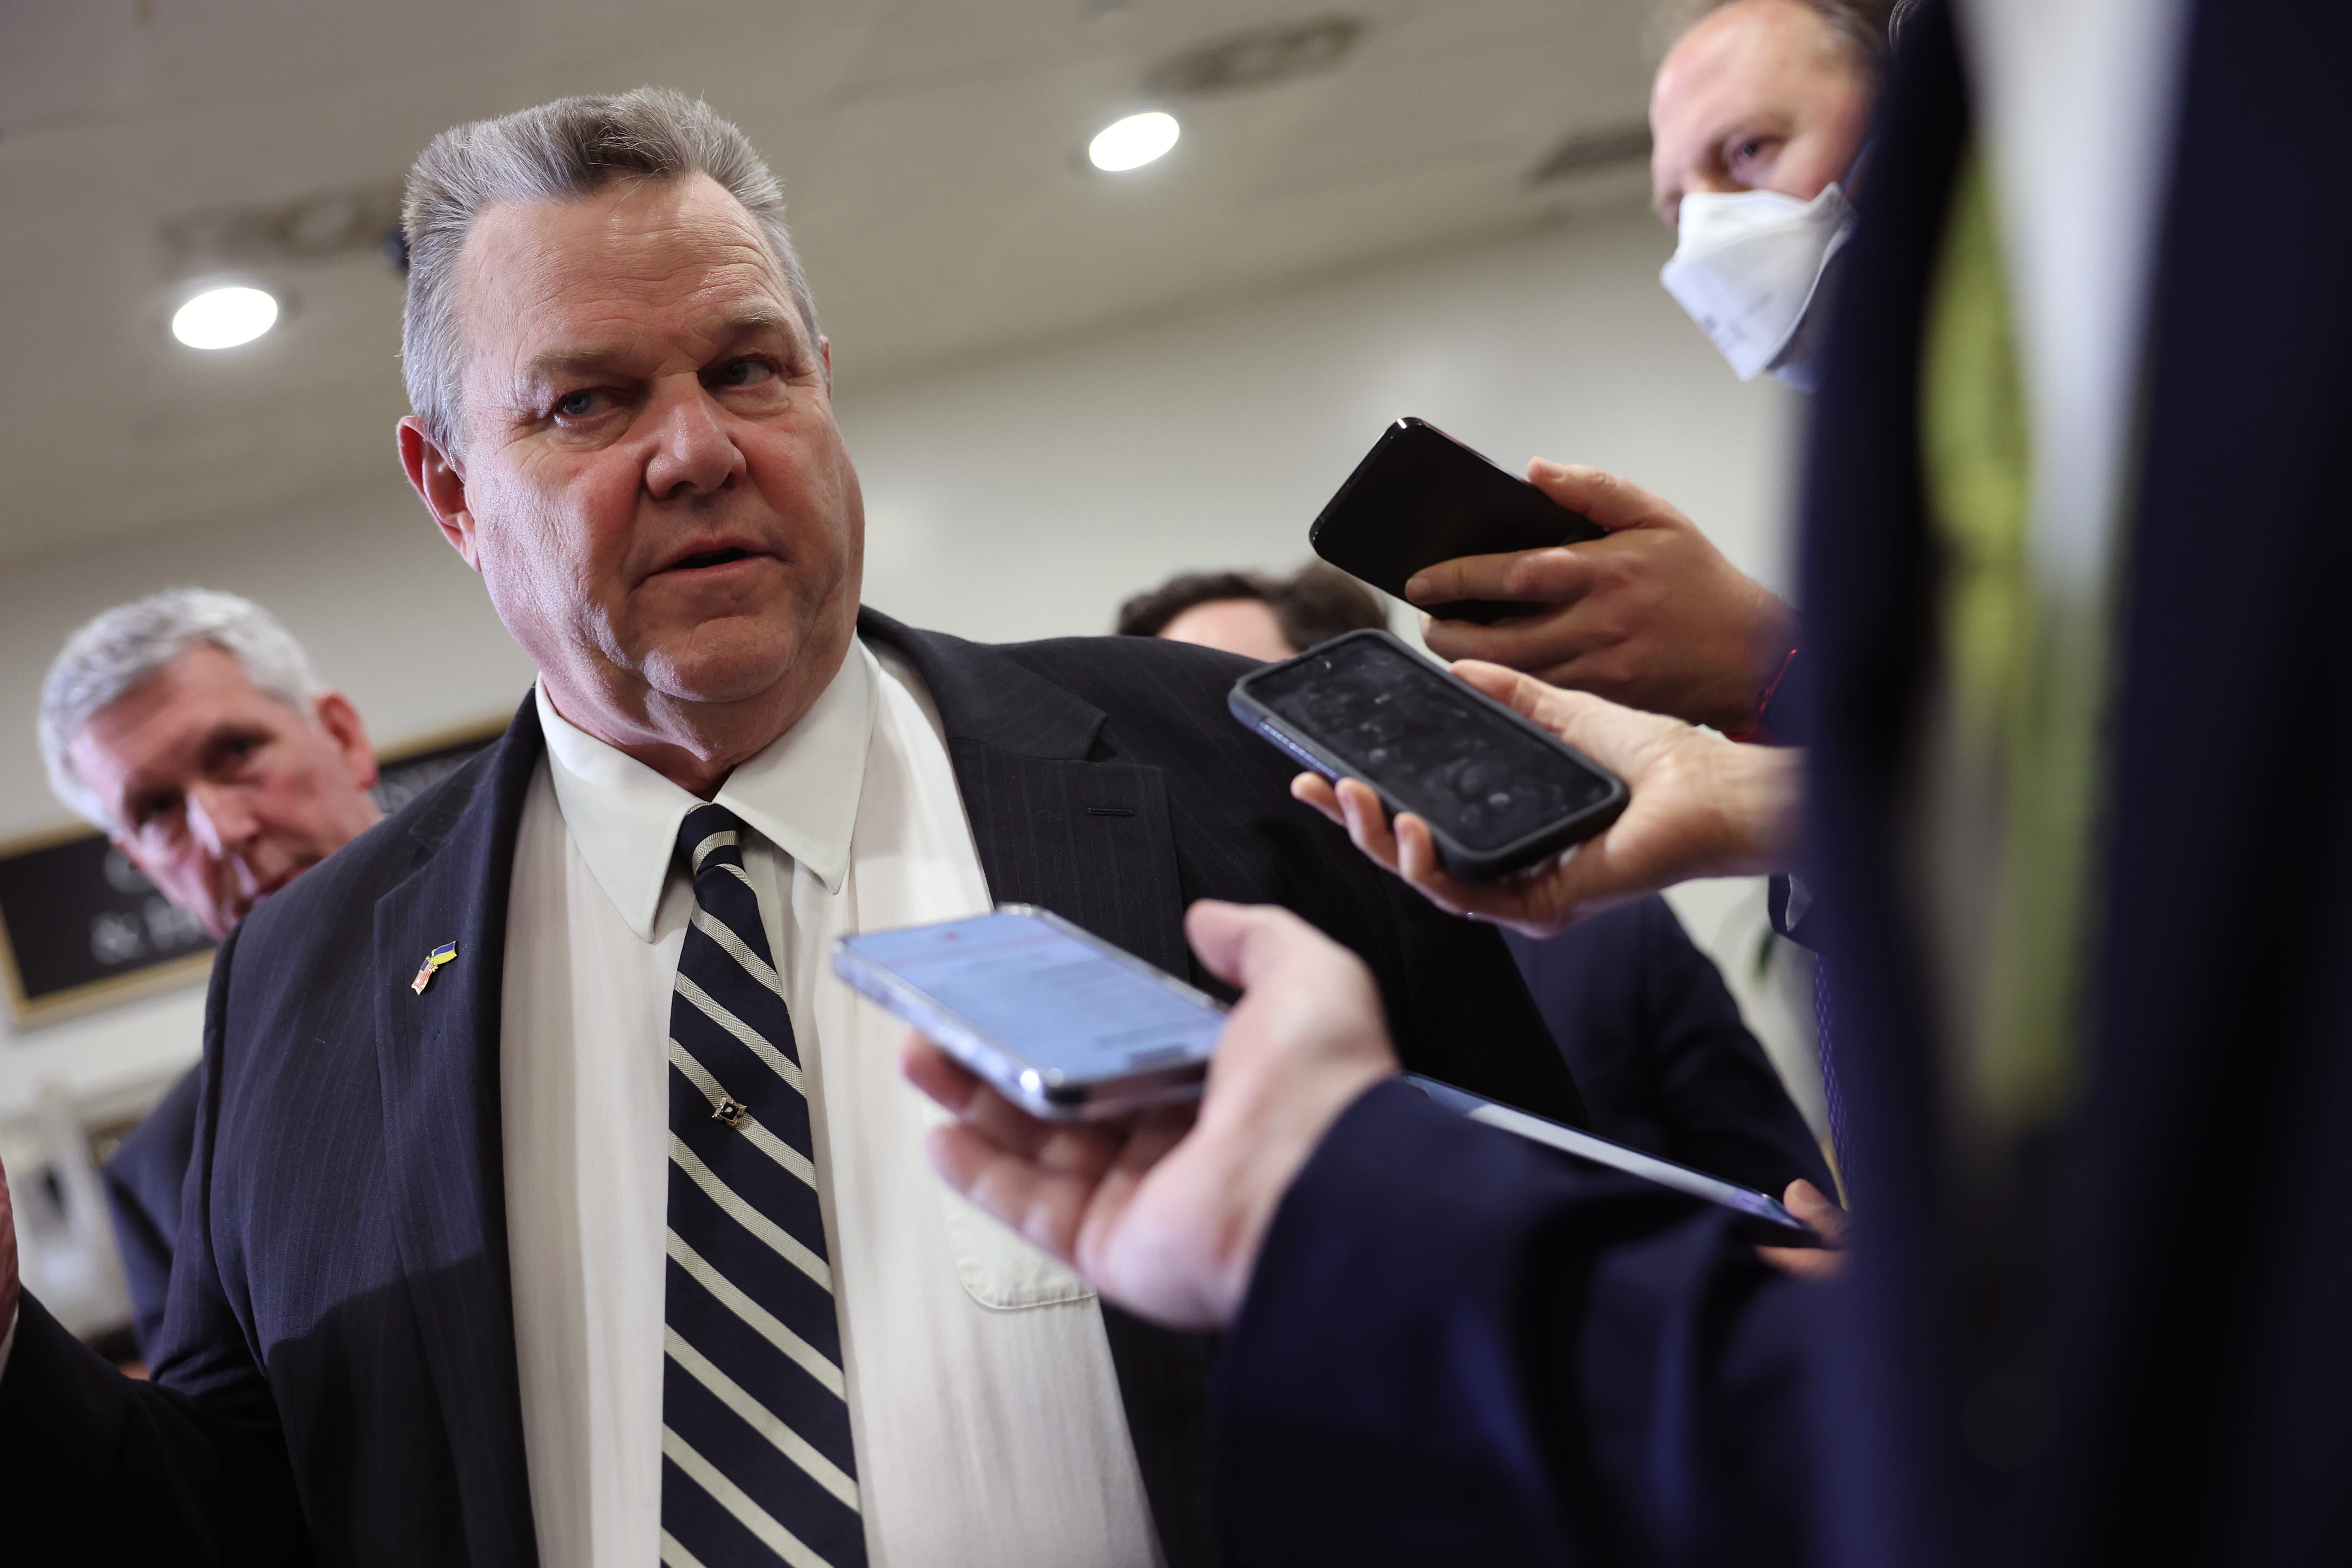 Trump disparages Jon Tester’s weight during fundraiser, saying he ‘looks pregnant’